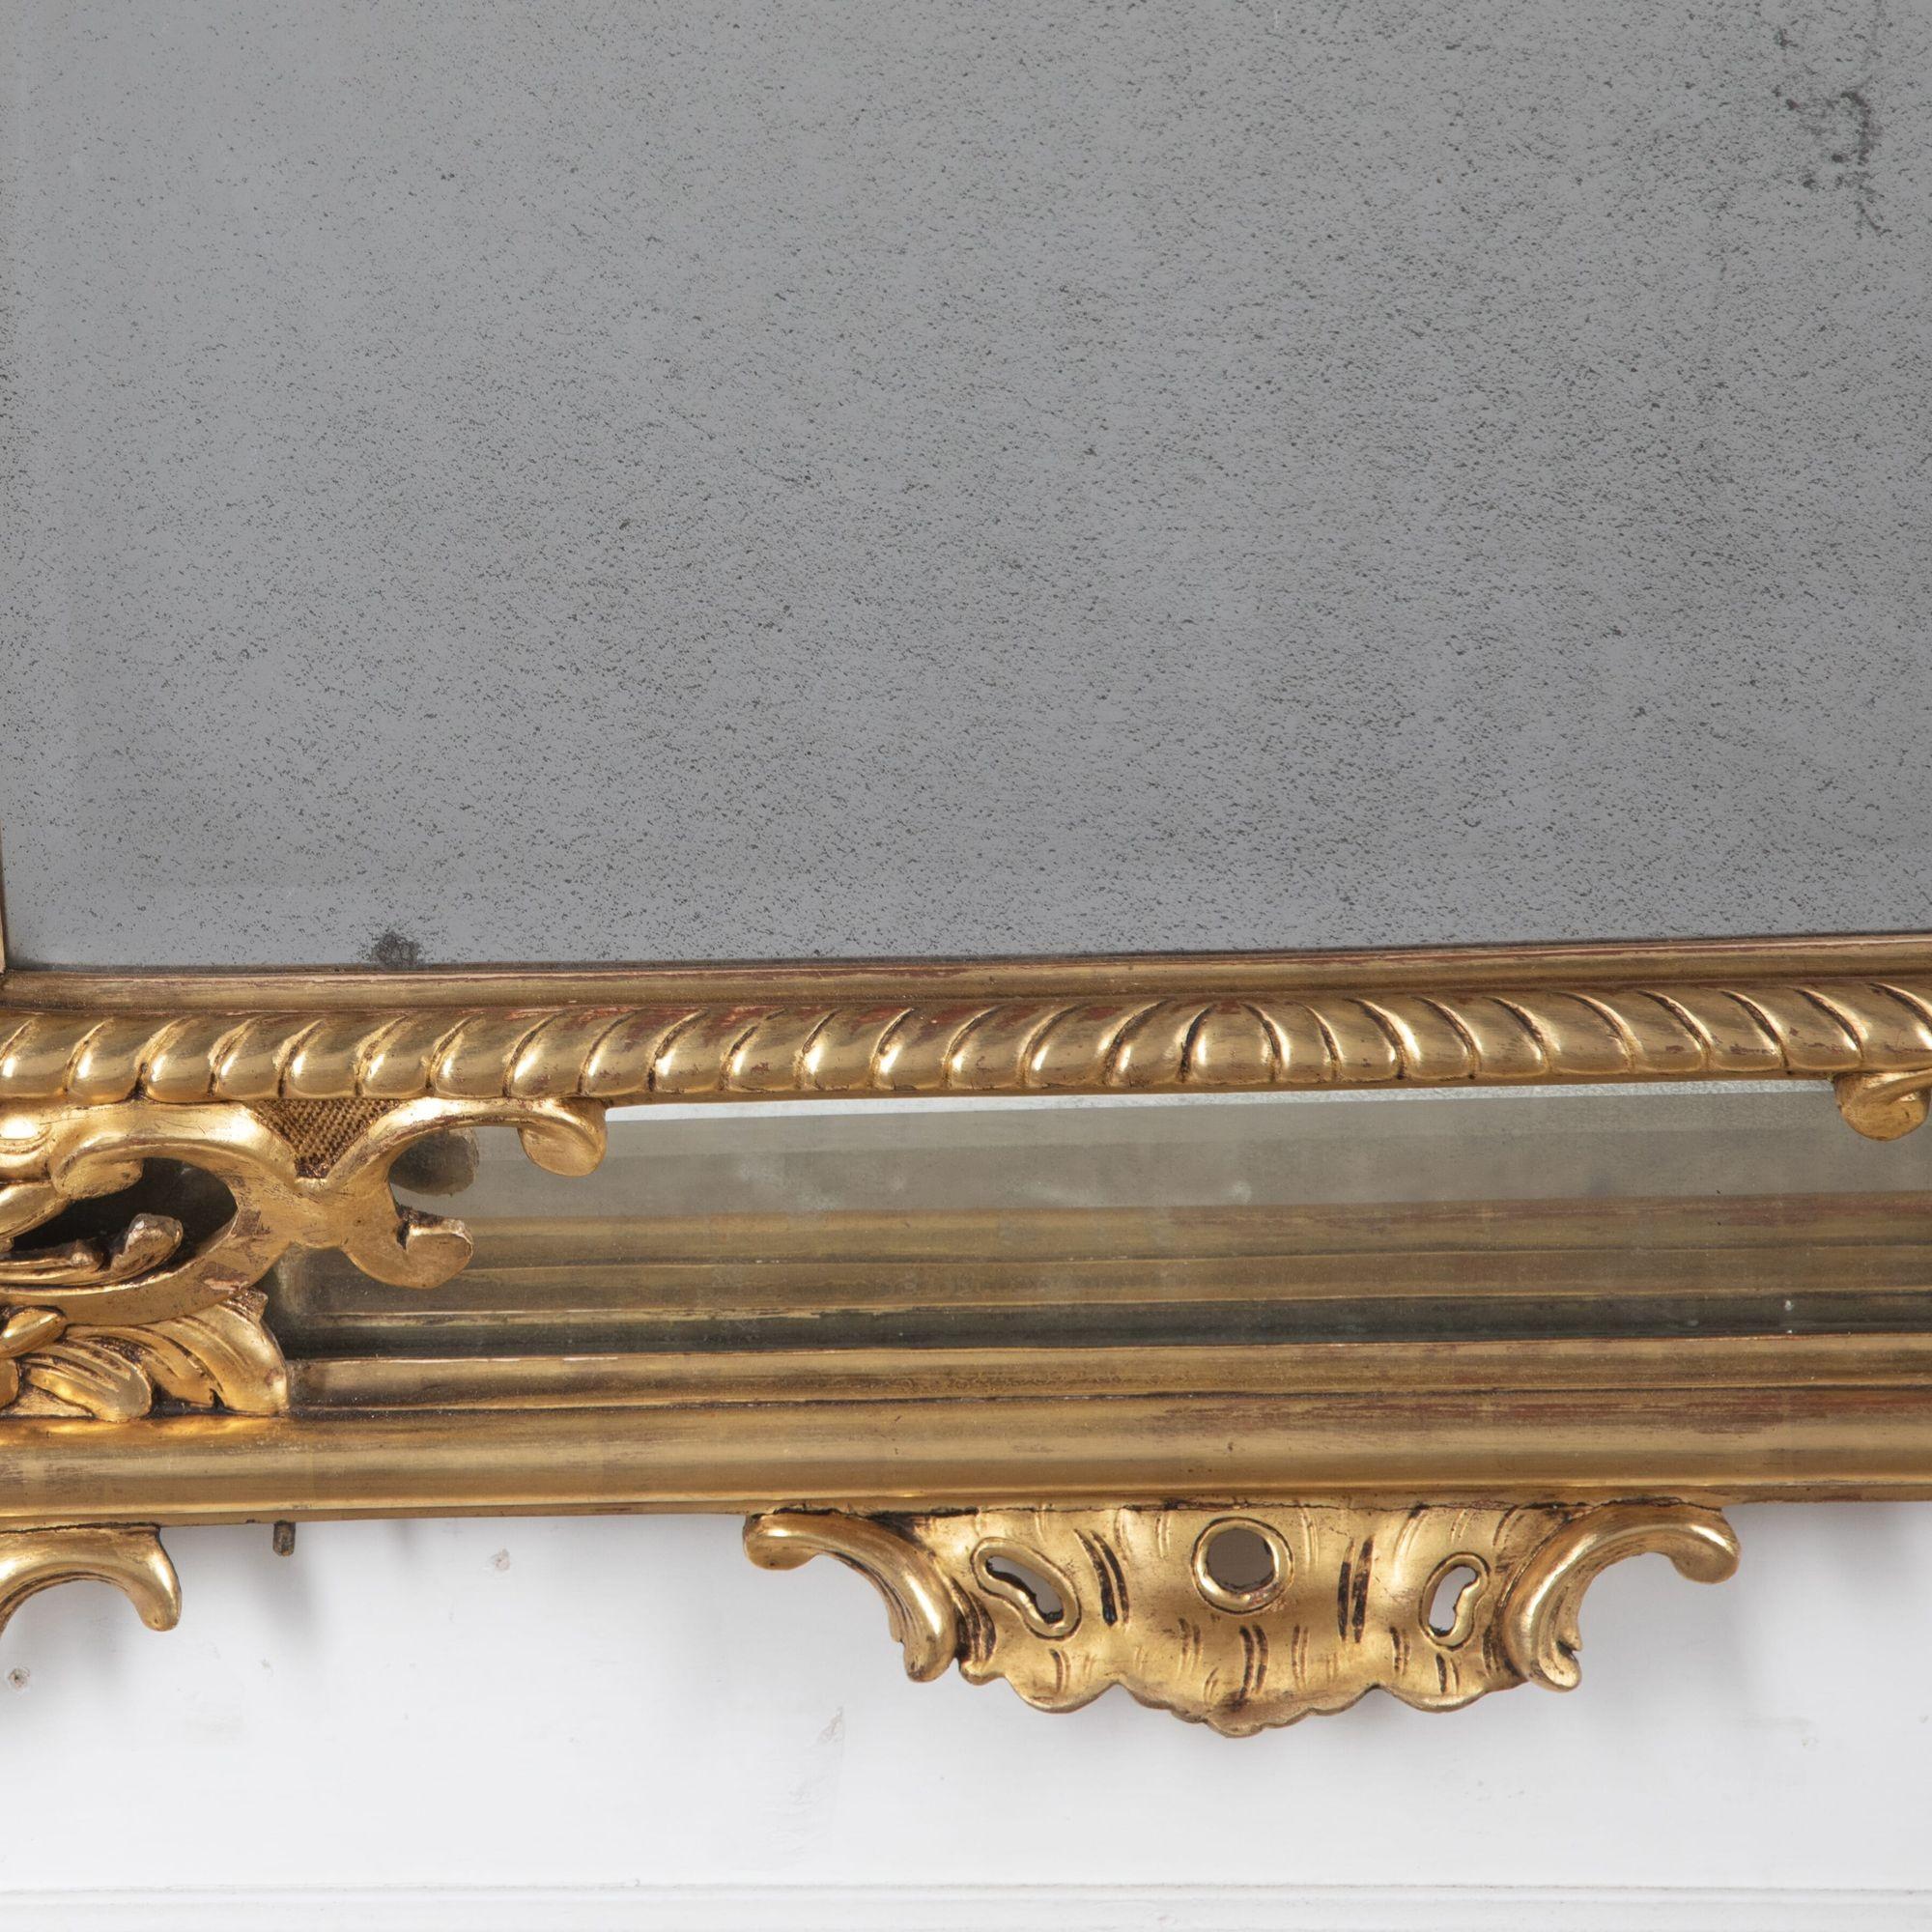 19th Century French large gilt wood cushion mirror of fine quality.
With restoration.